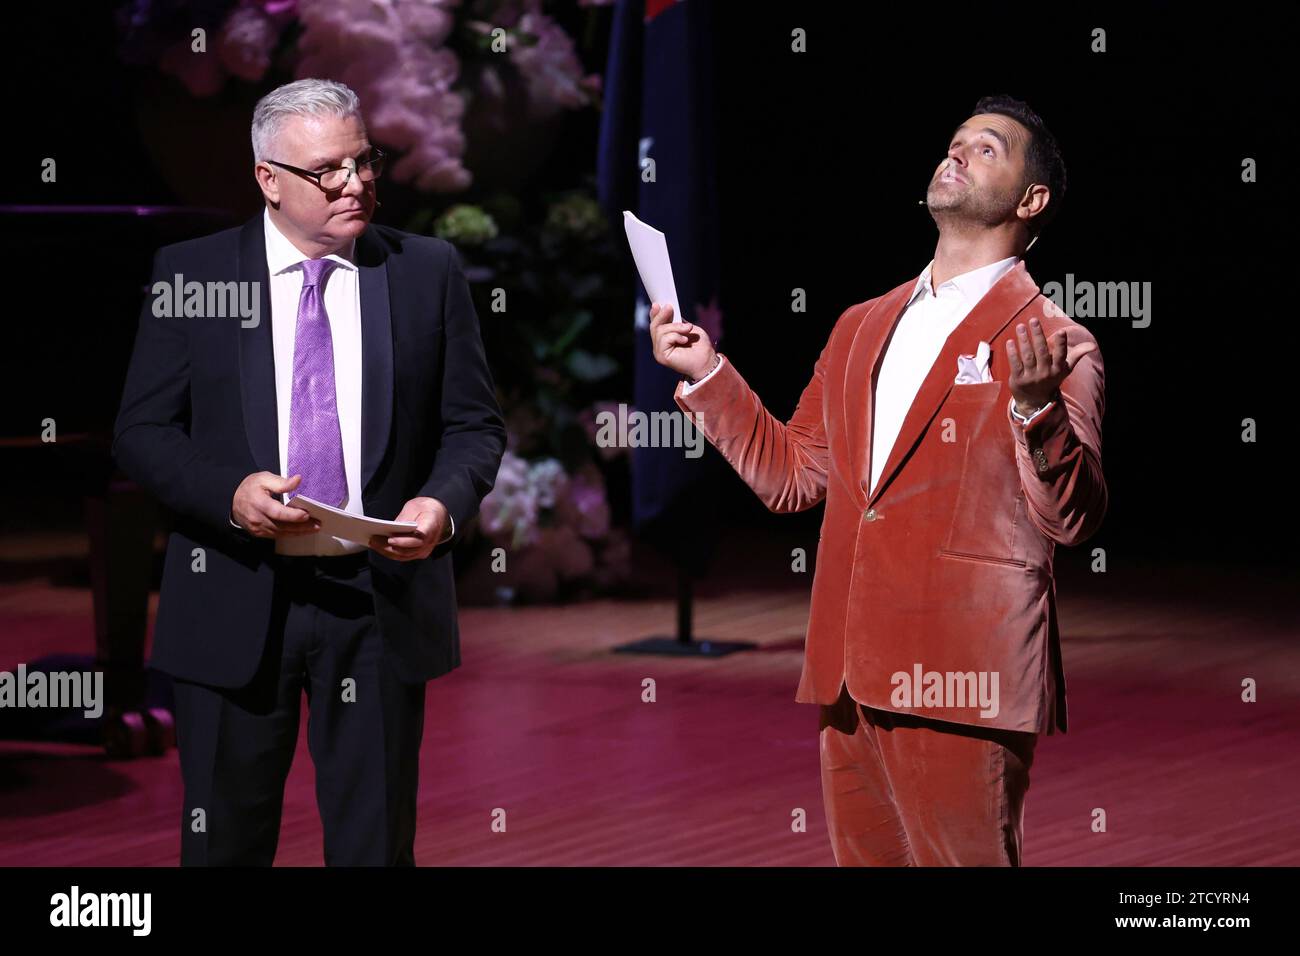 Andrew Ross L and Karl Schmid speak during the State Memorial Service for Australian comedian and actor Barry Humphries at the Sydney Opera House in Sydney, Friday, December 15, 2023. A State Memorial Service for Barry Humphries will recognise the late entertainers contribution to Australian arts and entertainment. AAP Image/Pool, David Gray NO ARCHIVING SYDNEY NSW AUSTRALIA *** Andrew Ross L and Karl Schmid speak during the State Memorial Service for Australian comedian and actor Barry Humphries at the Sydney Opera House in Sydney, Friday, December 15, 2023 A State Memorial Service for Barry Stock Photo